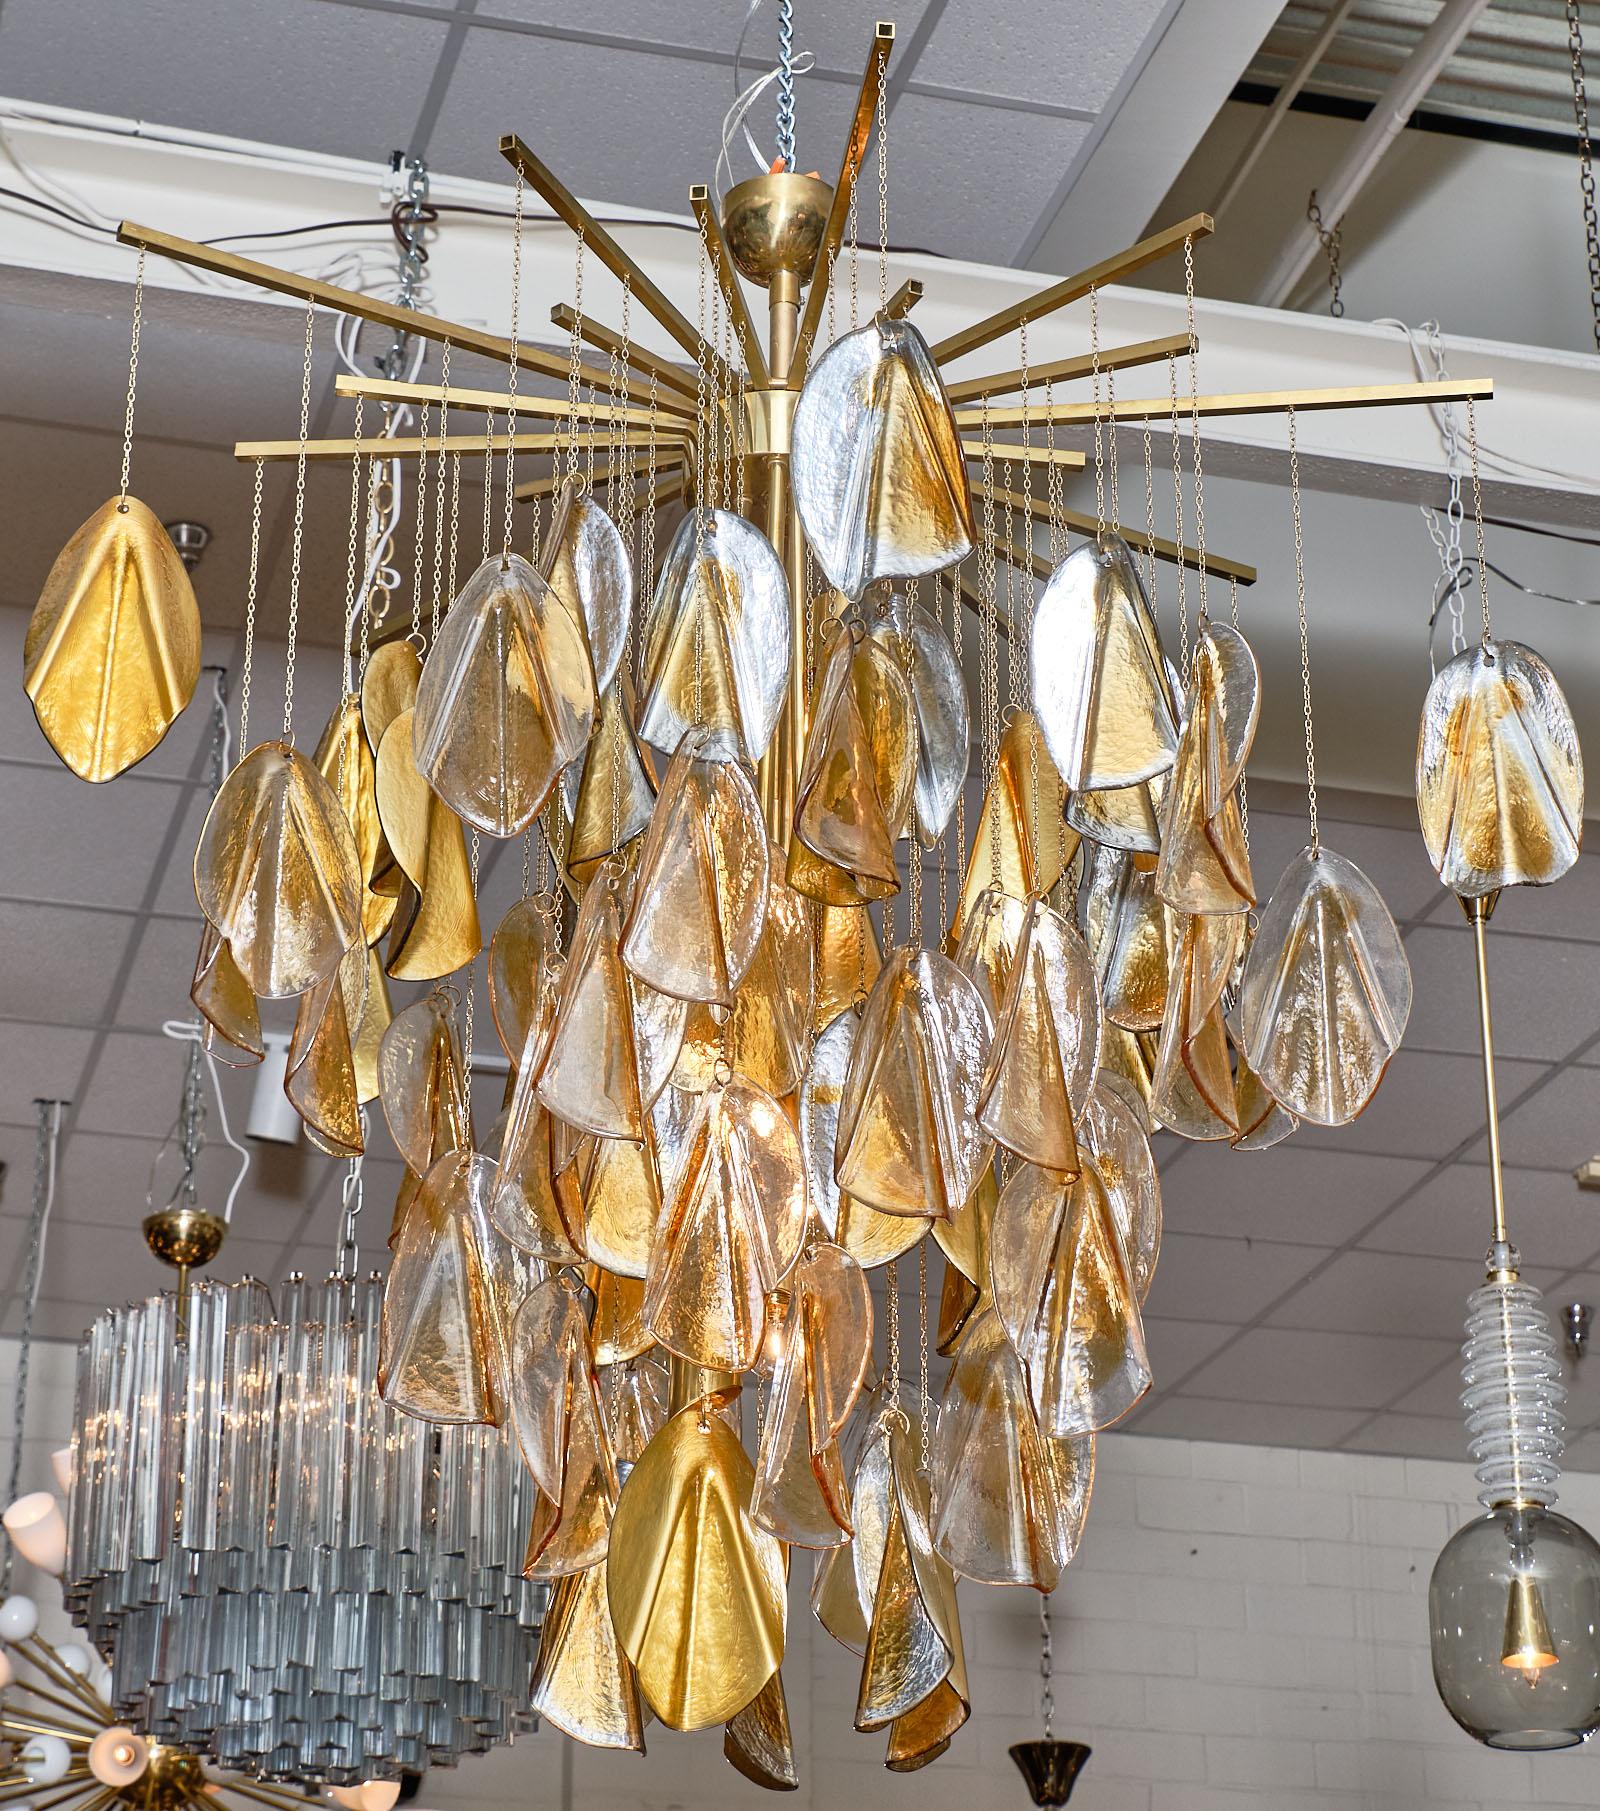 Murano glass chandelier in excellent condition. The brass structure holds 75 hand-blown glass elements - 35 with mirrored and amber glass; and 40 with clear and amber glass. This striking fixture catches the light in such lovely ways. It has been